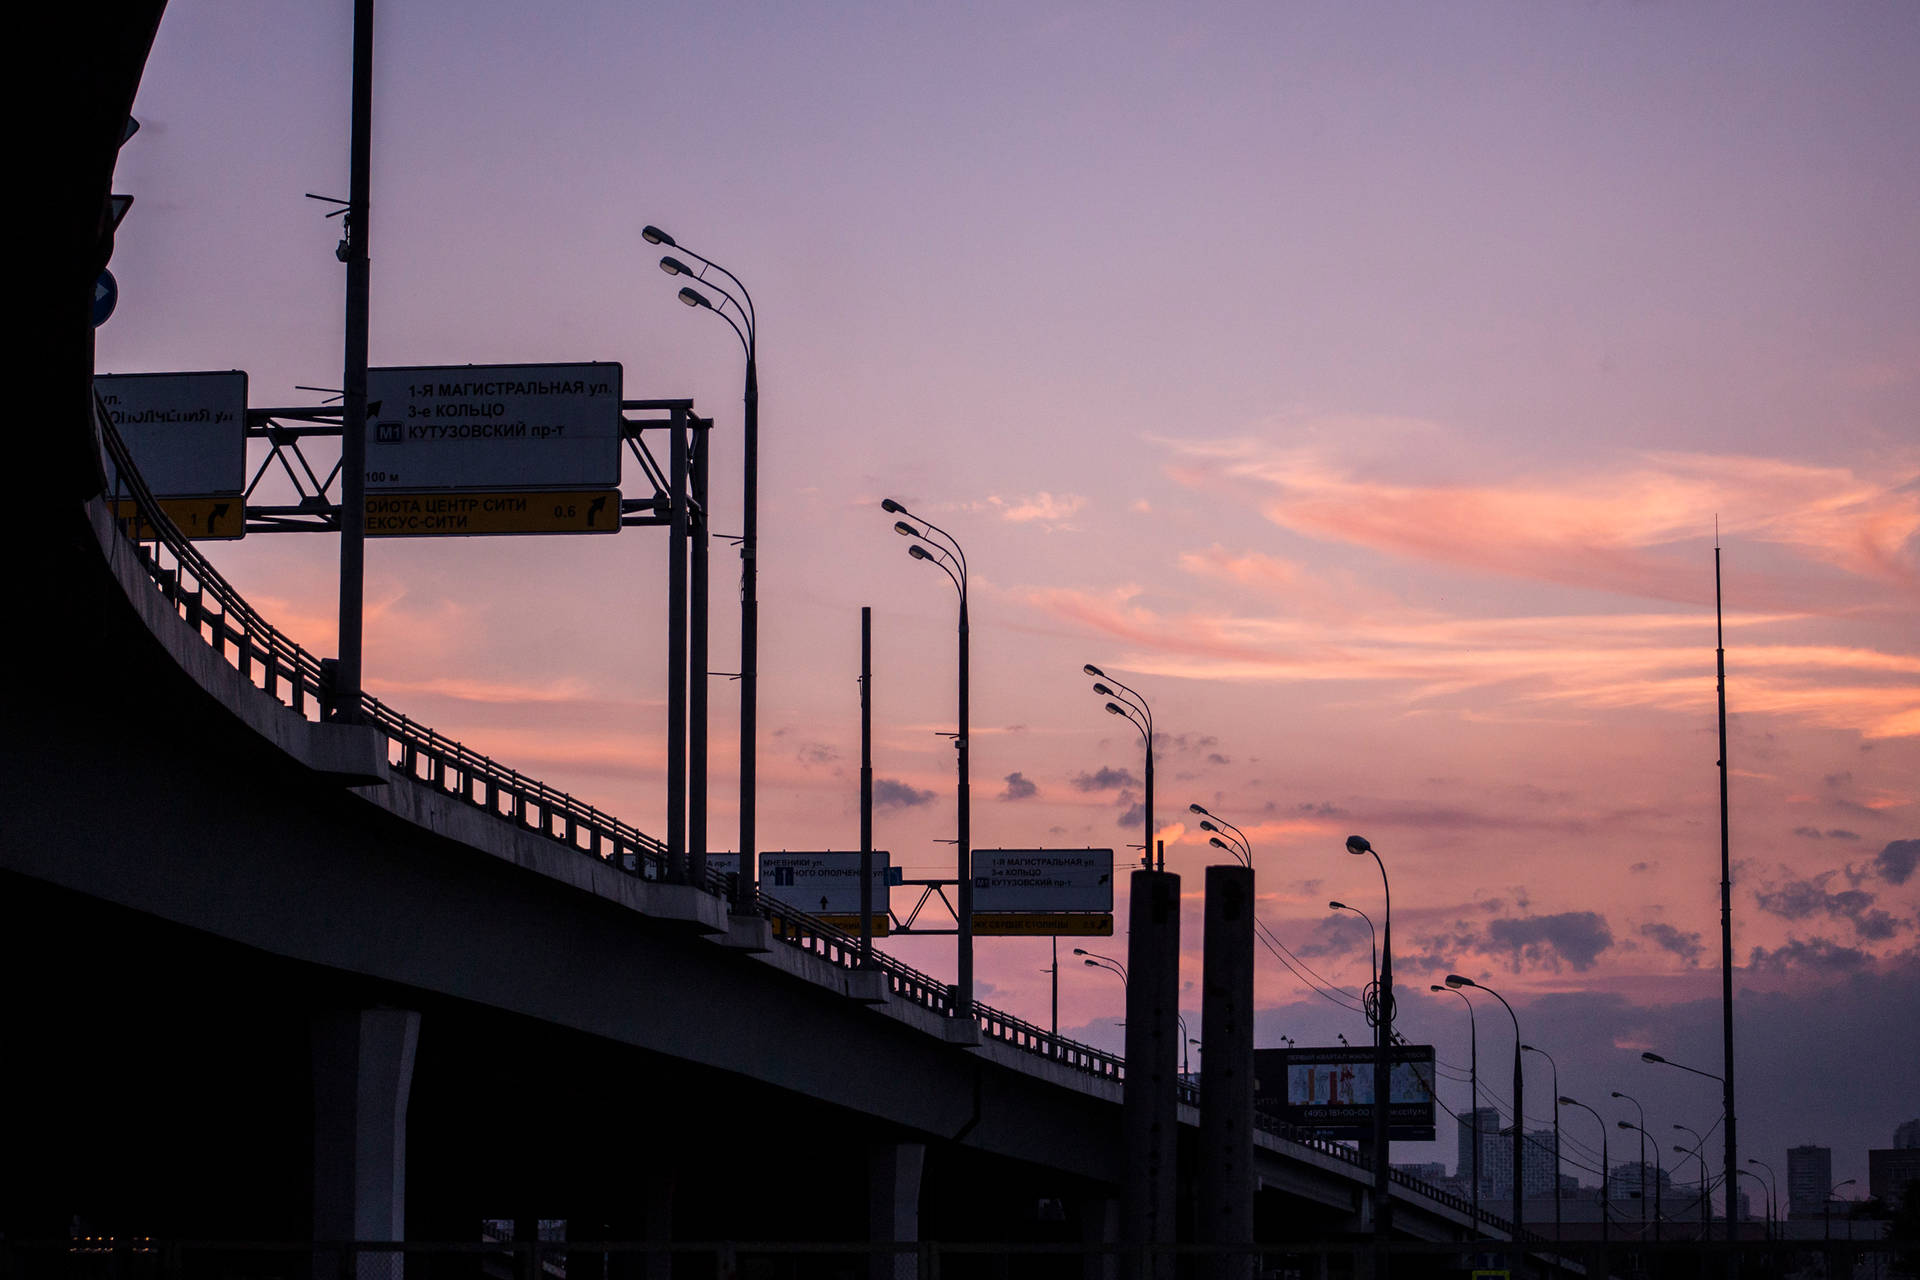 Picture perfect - perfect view of the Skyway Bridge with glowing lights at dusk. Wallpaper